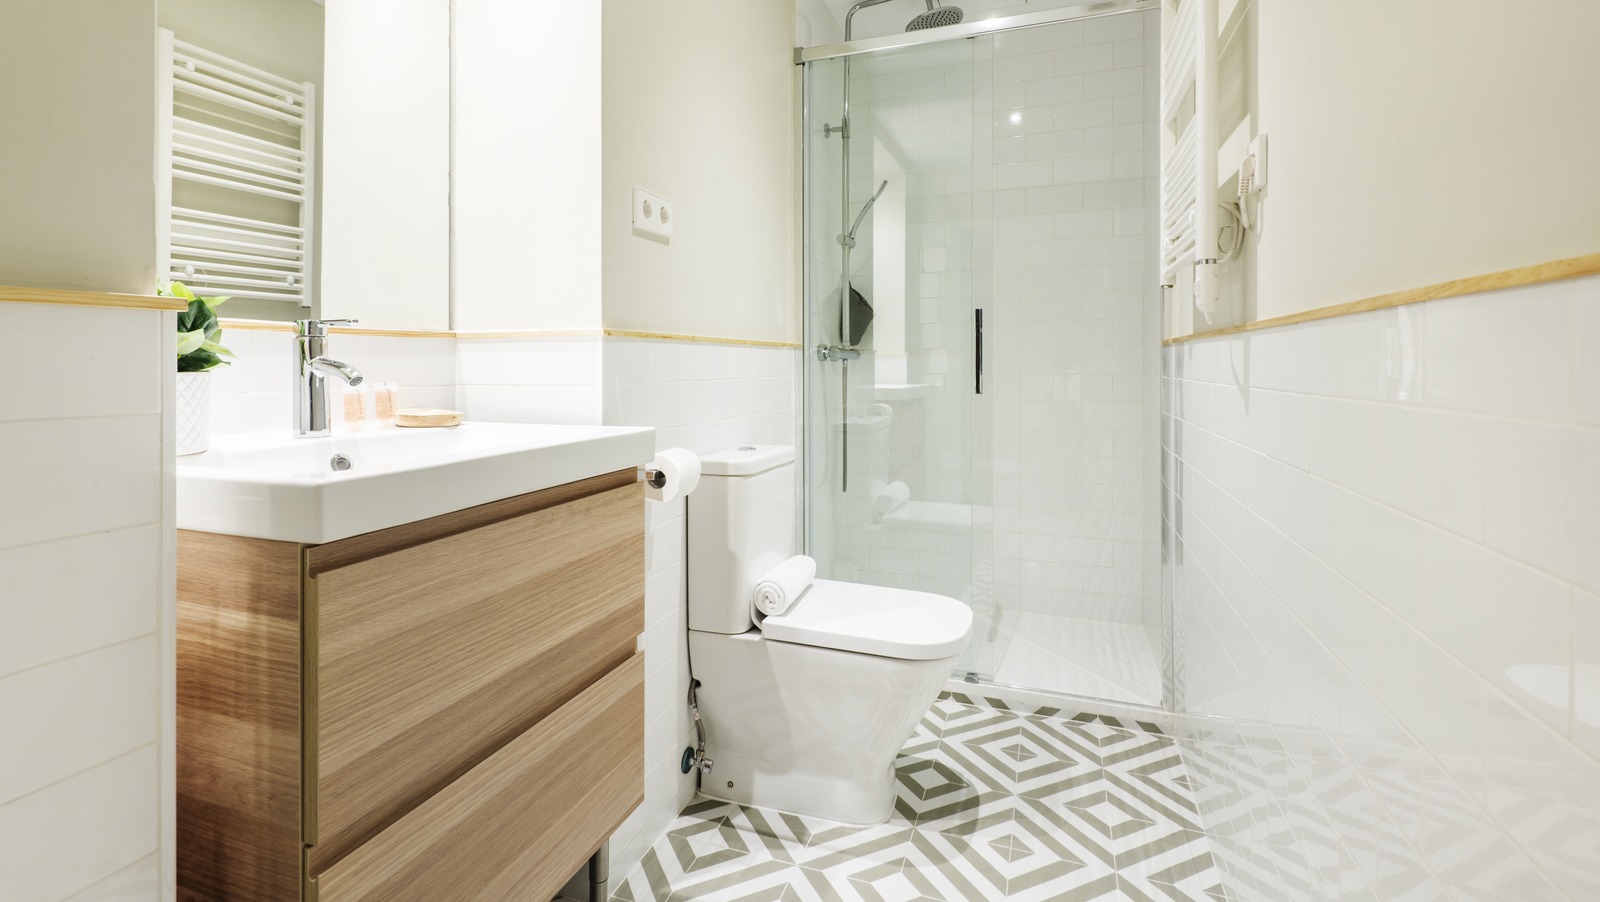 Affordable Storage Solutions for Small Bathrooms 